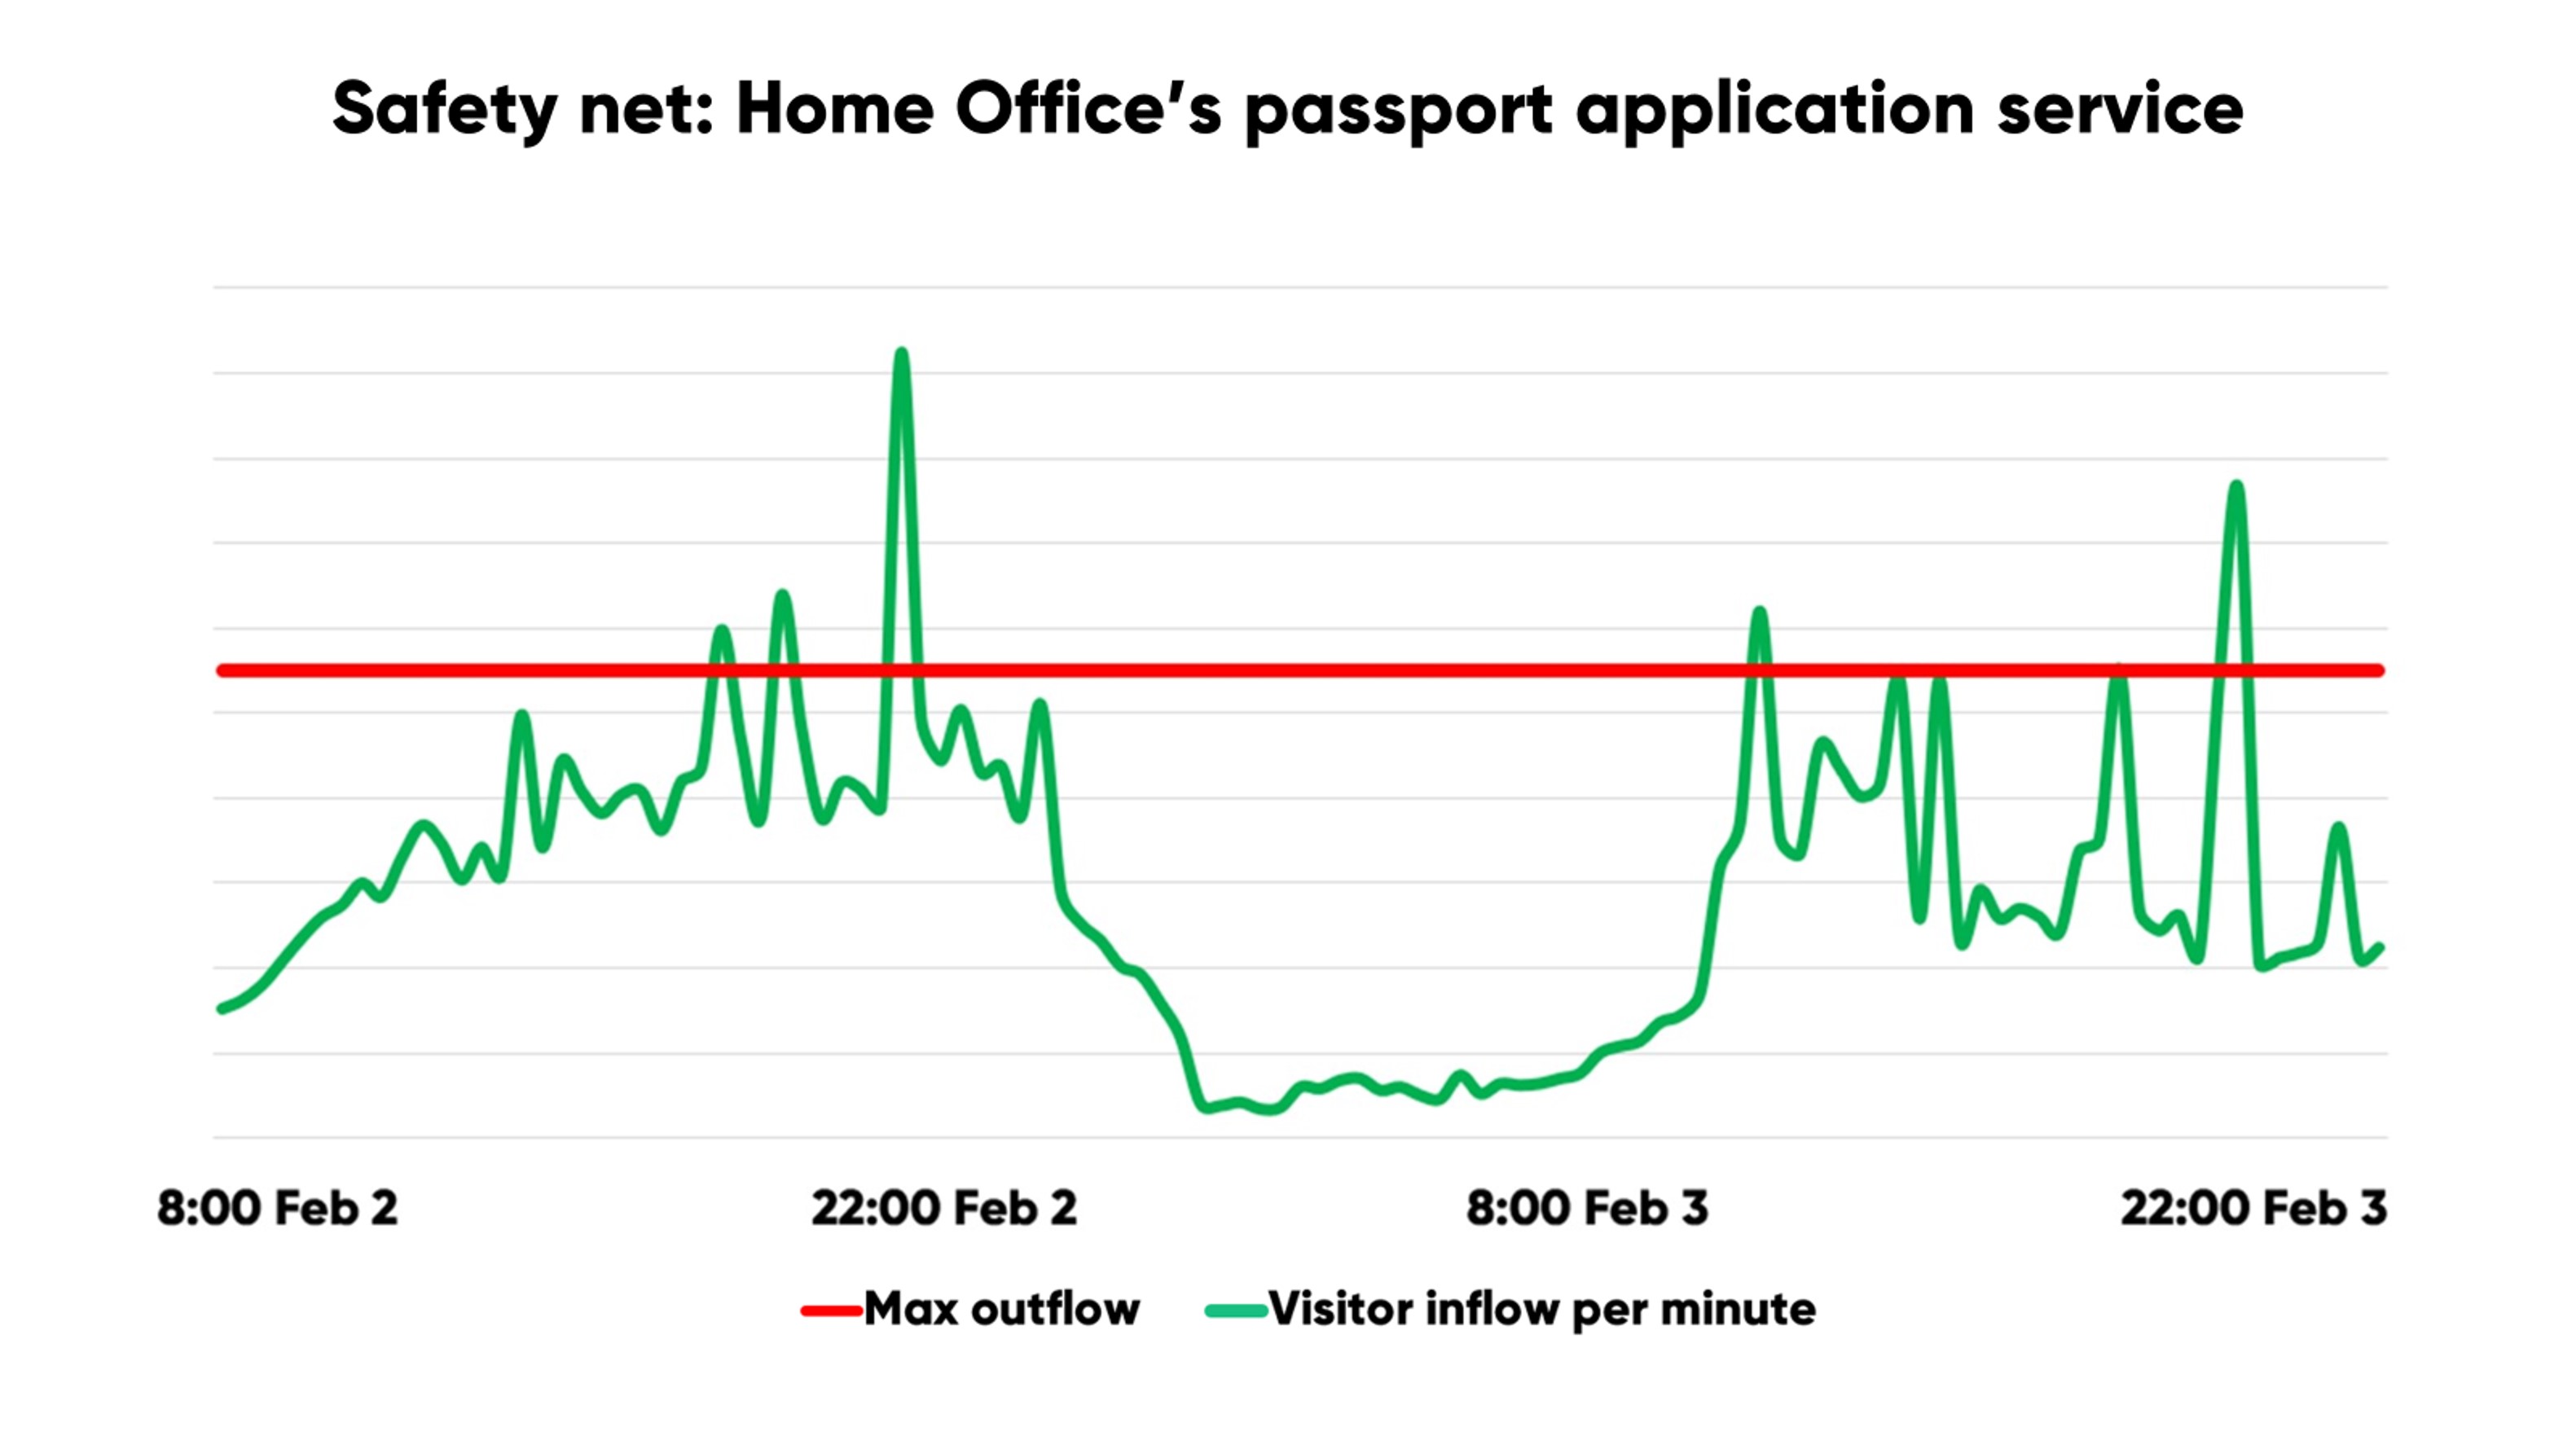 Chart showing Home Office's traffic spiking several times over 2 days